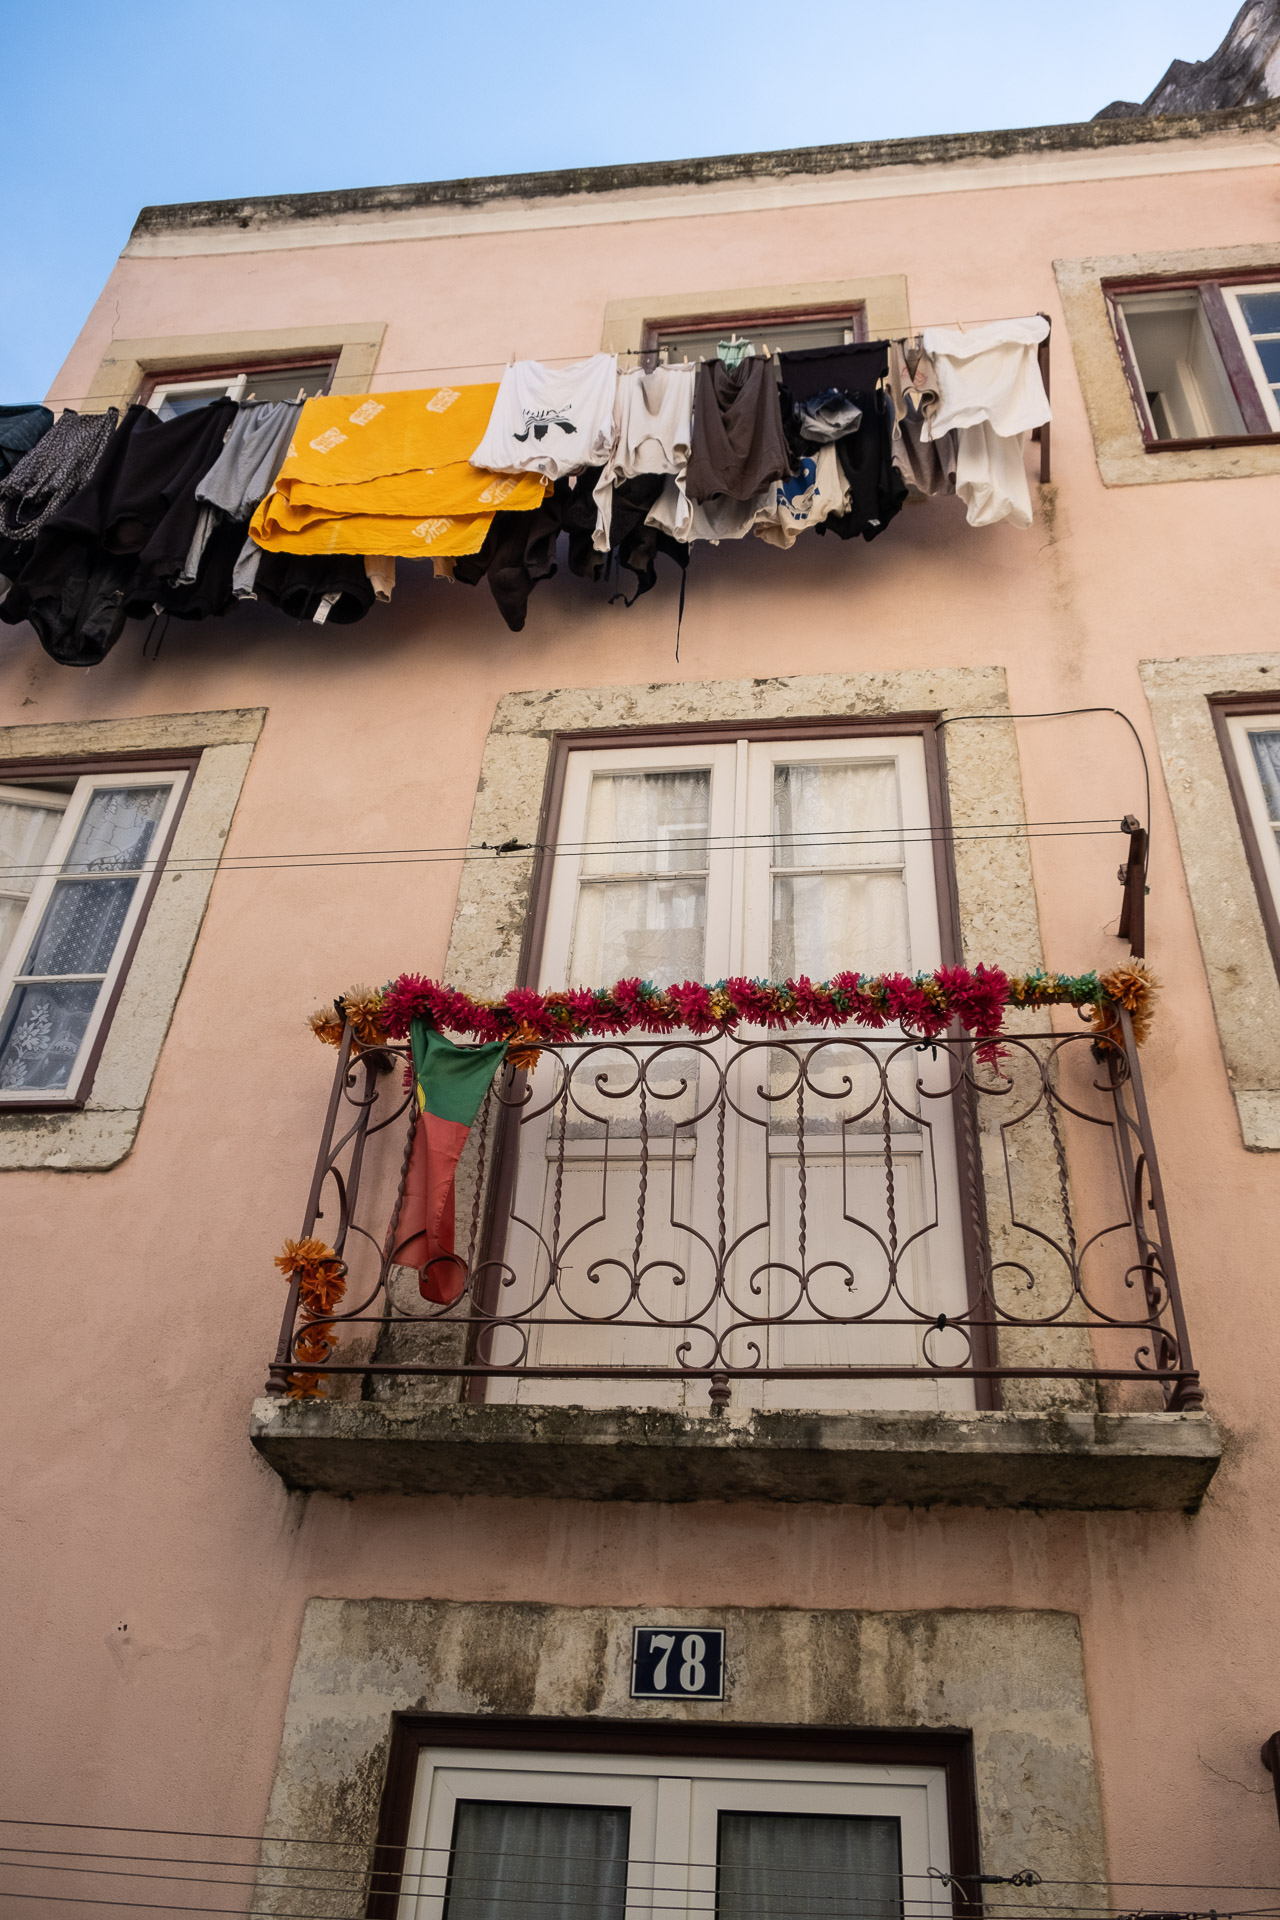 laundry hanging outside a house with a floral French balcony in lisbon